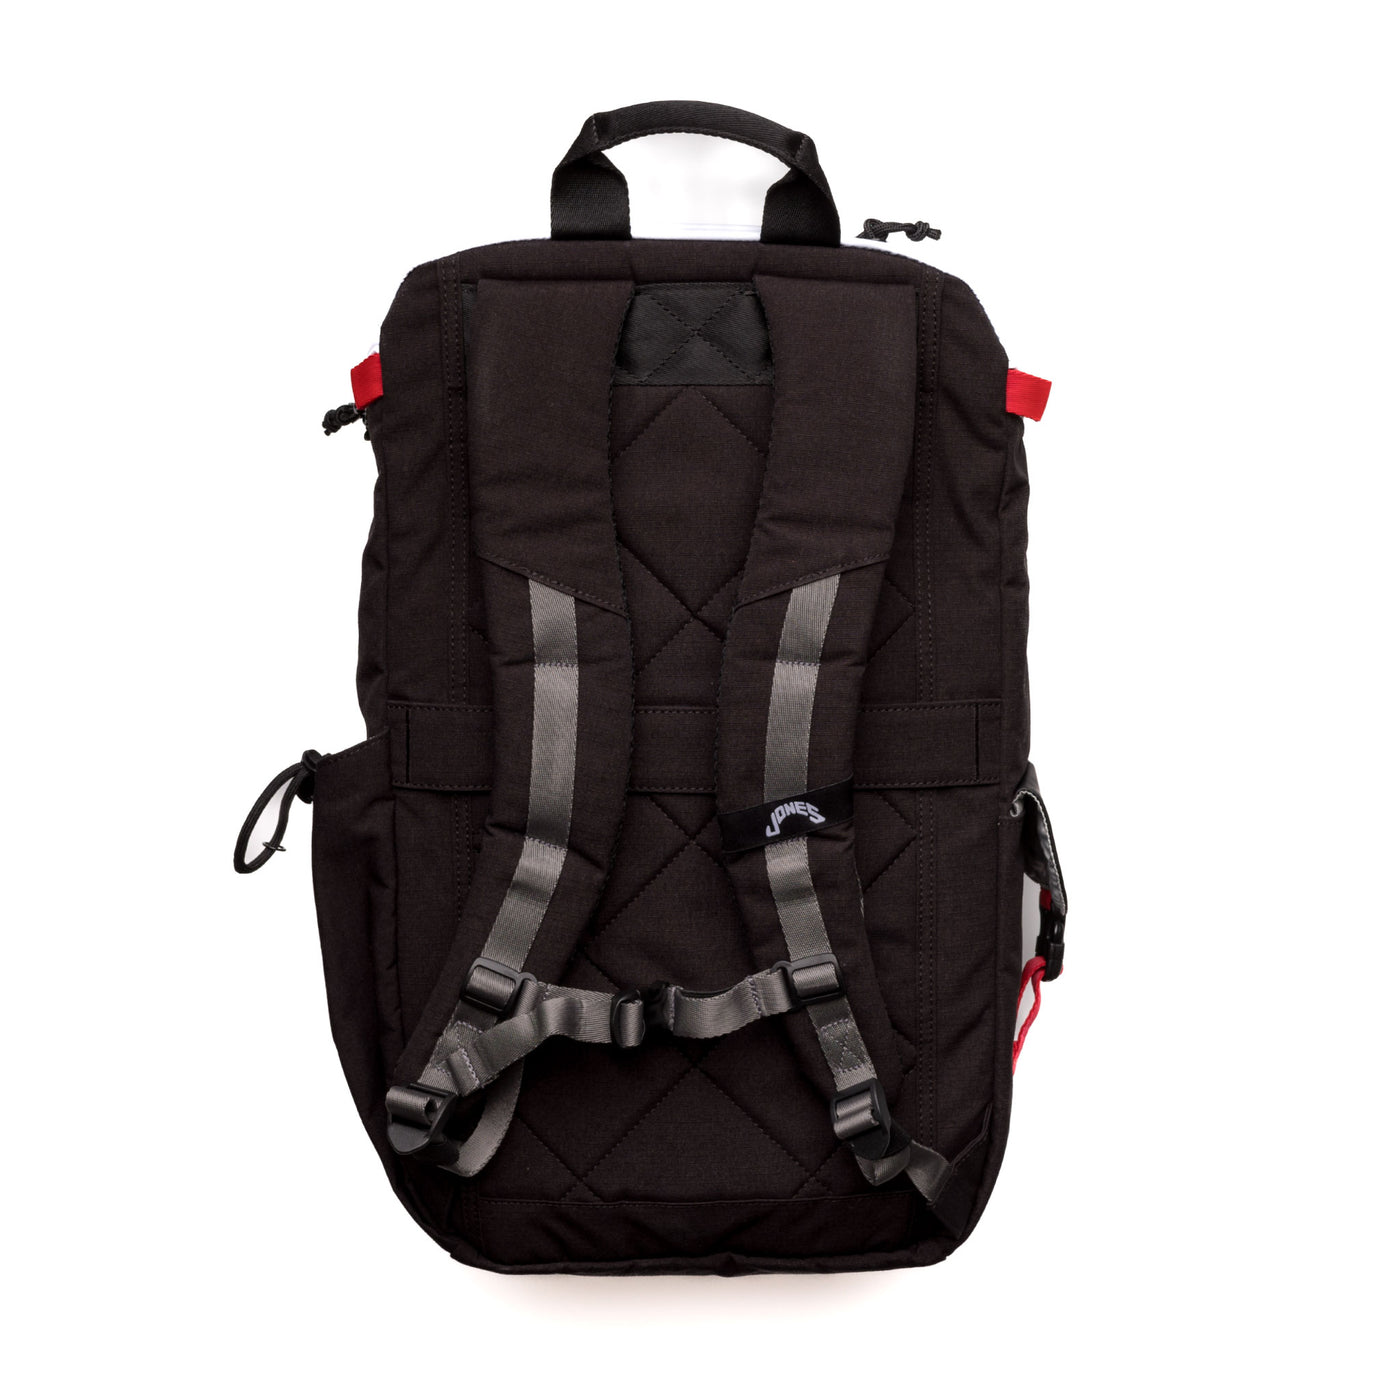 Scout Backpack R - Black